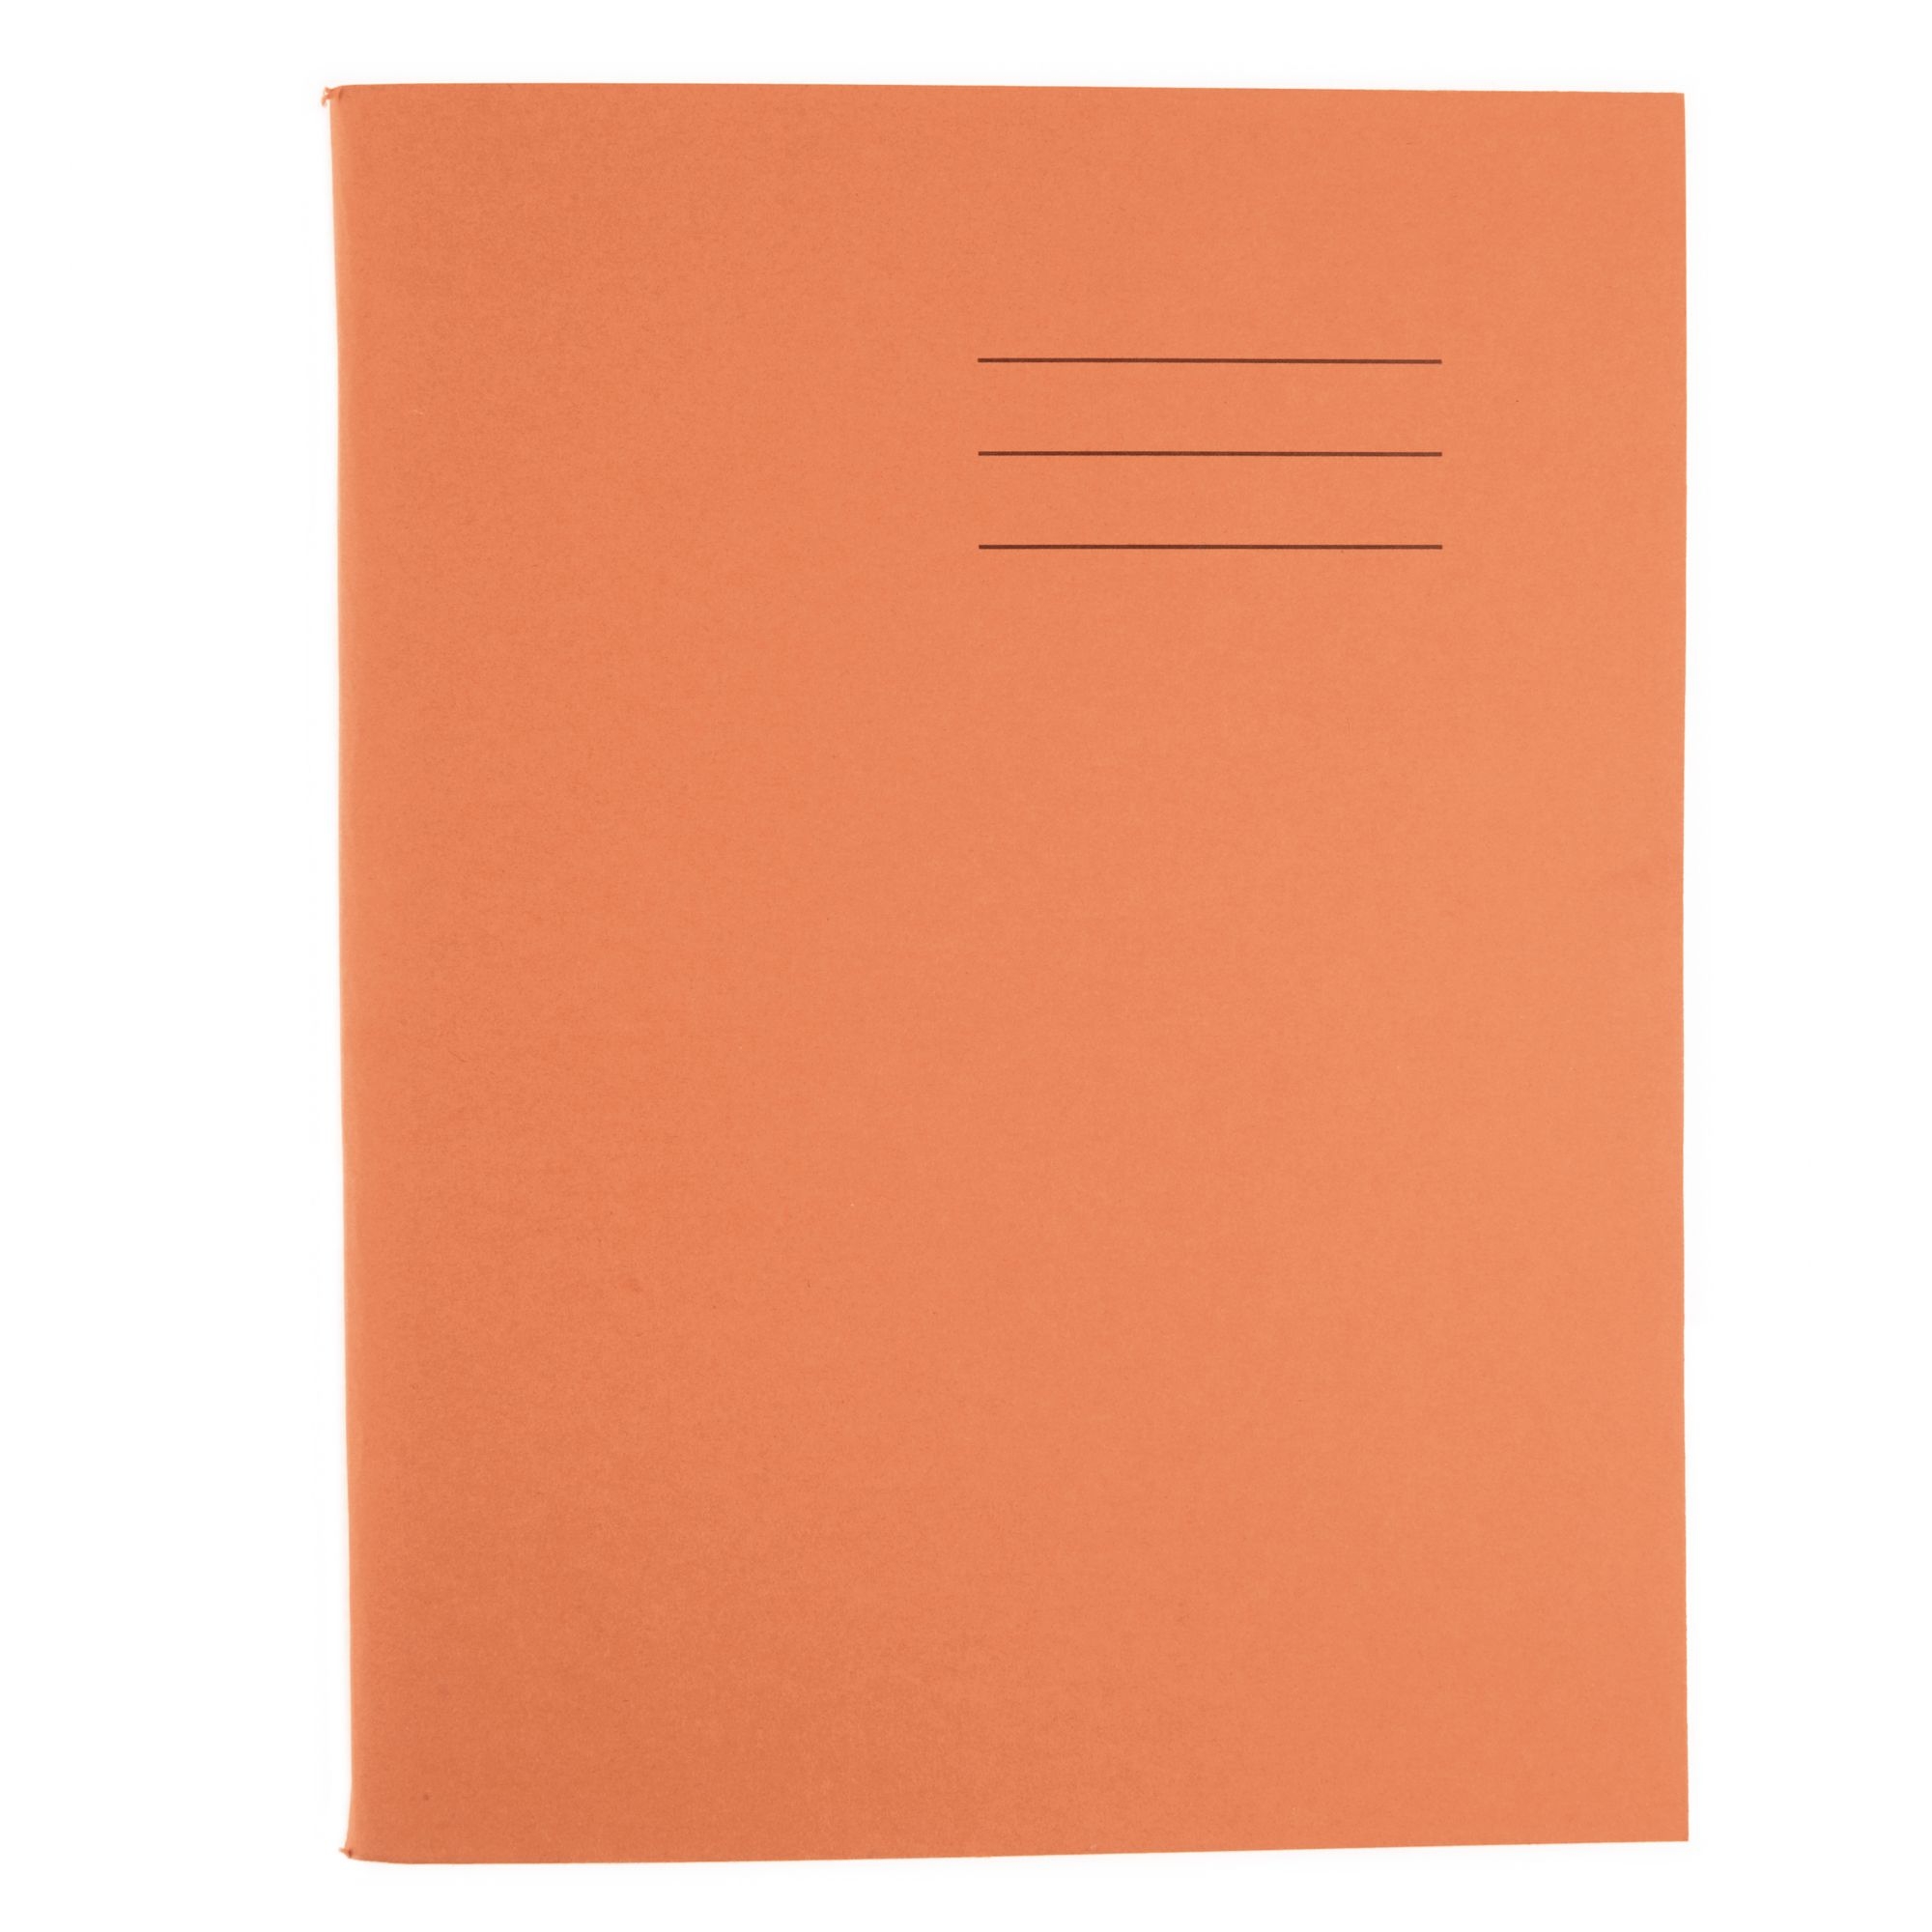 9x7 Exercise Book 80 Page, Plain/8mm Ruled with Margin Alternate, Orange - Pack of 100